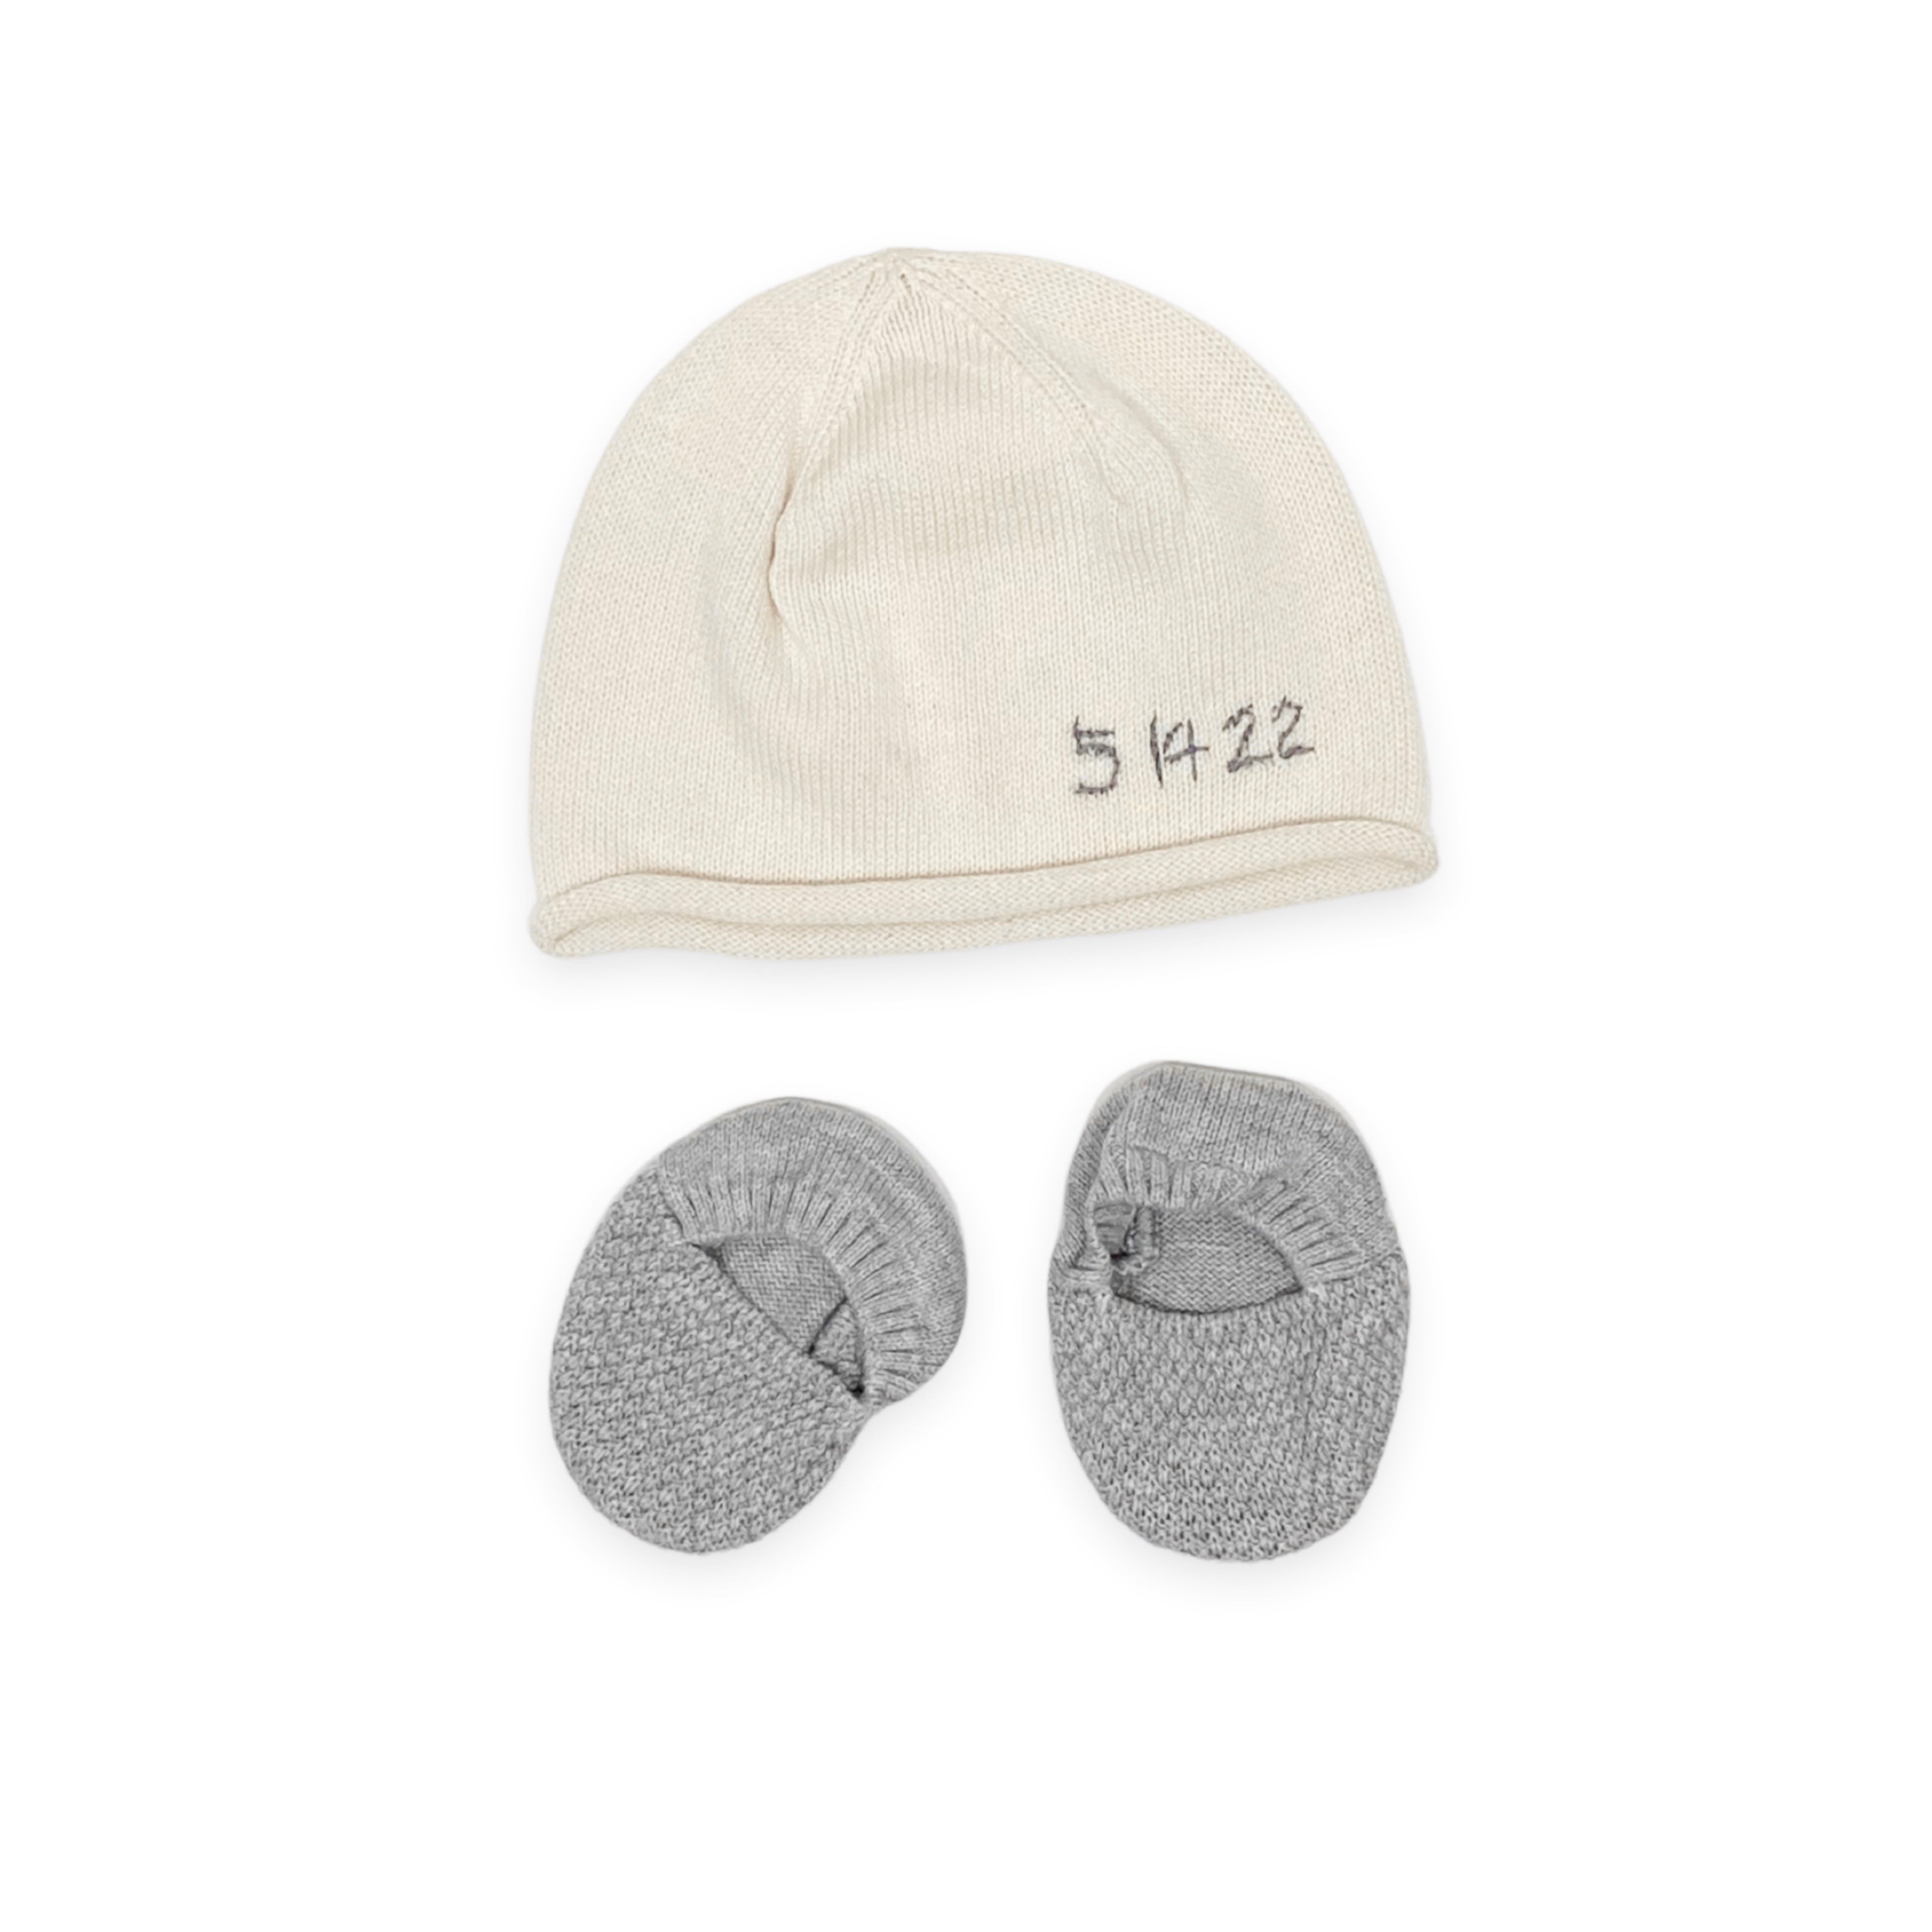 Hand Embroidered Birth Date Sweater Cap + Booties